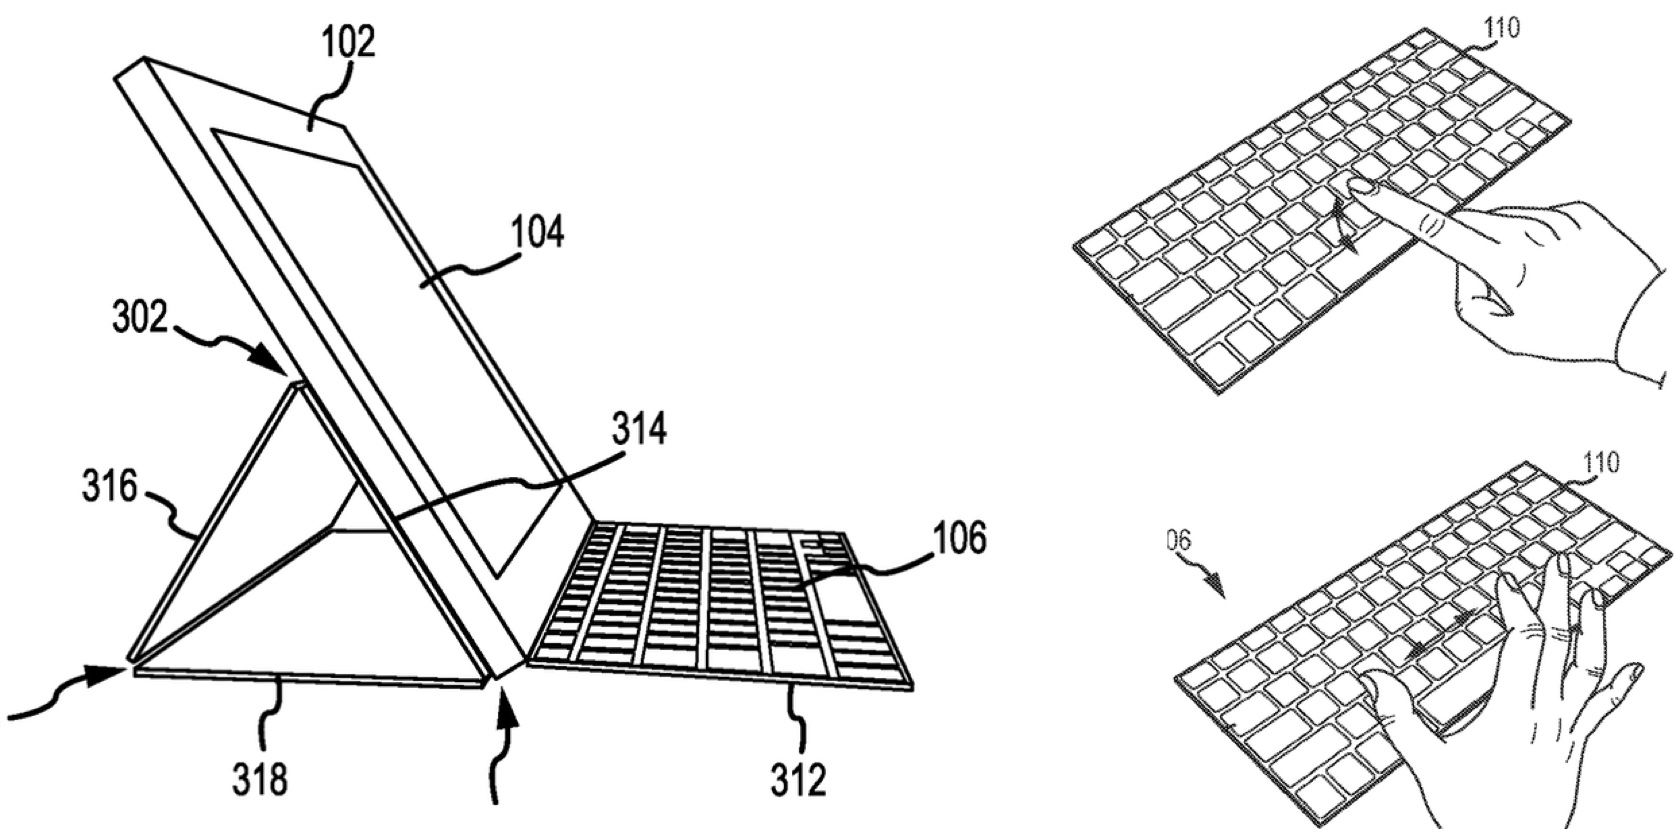 An Apple patent drawing envisioning an iPad Magic Keyboard with Multi-Touch keys